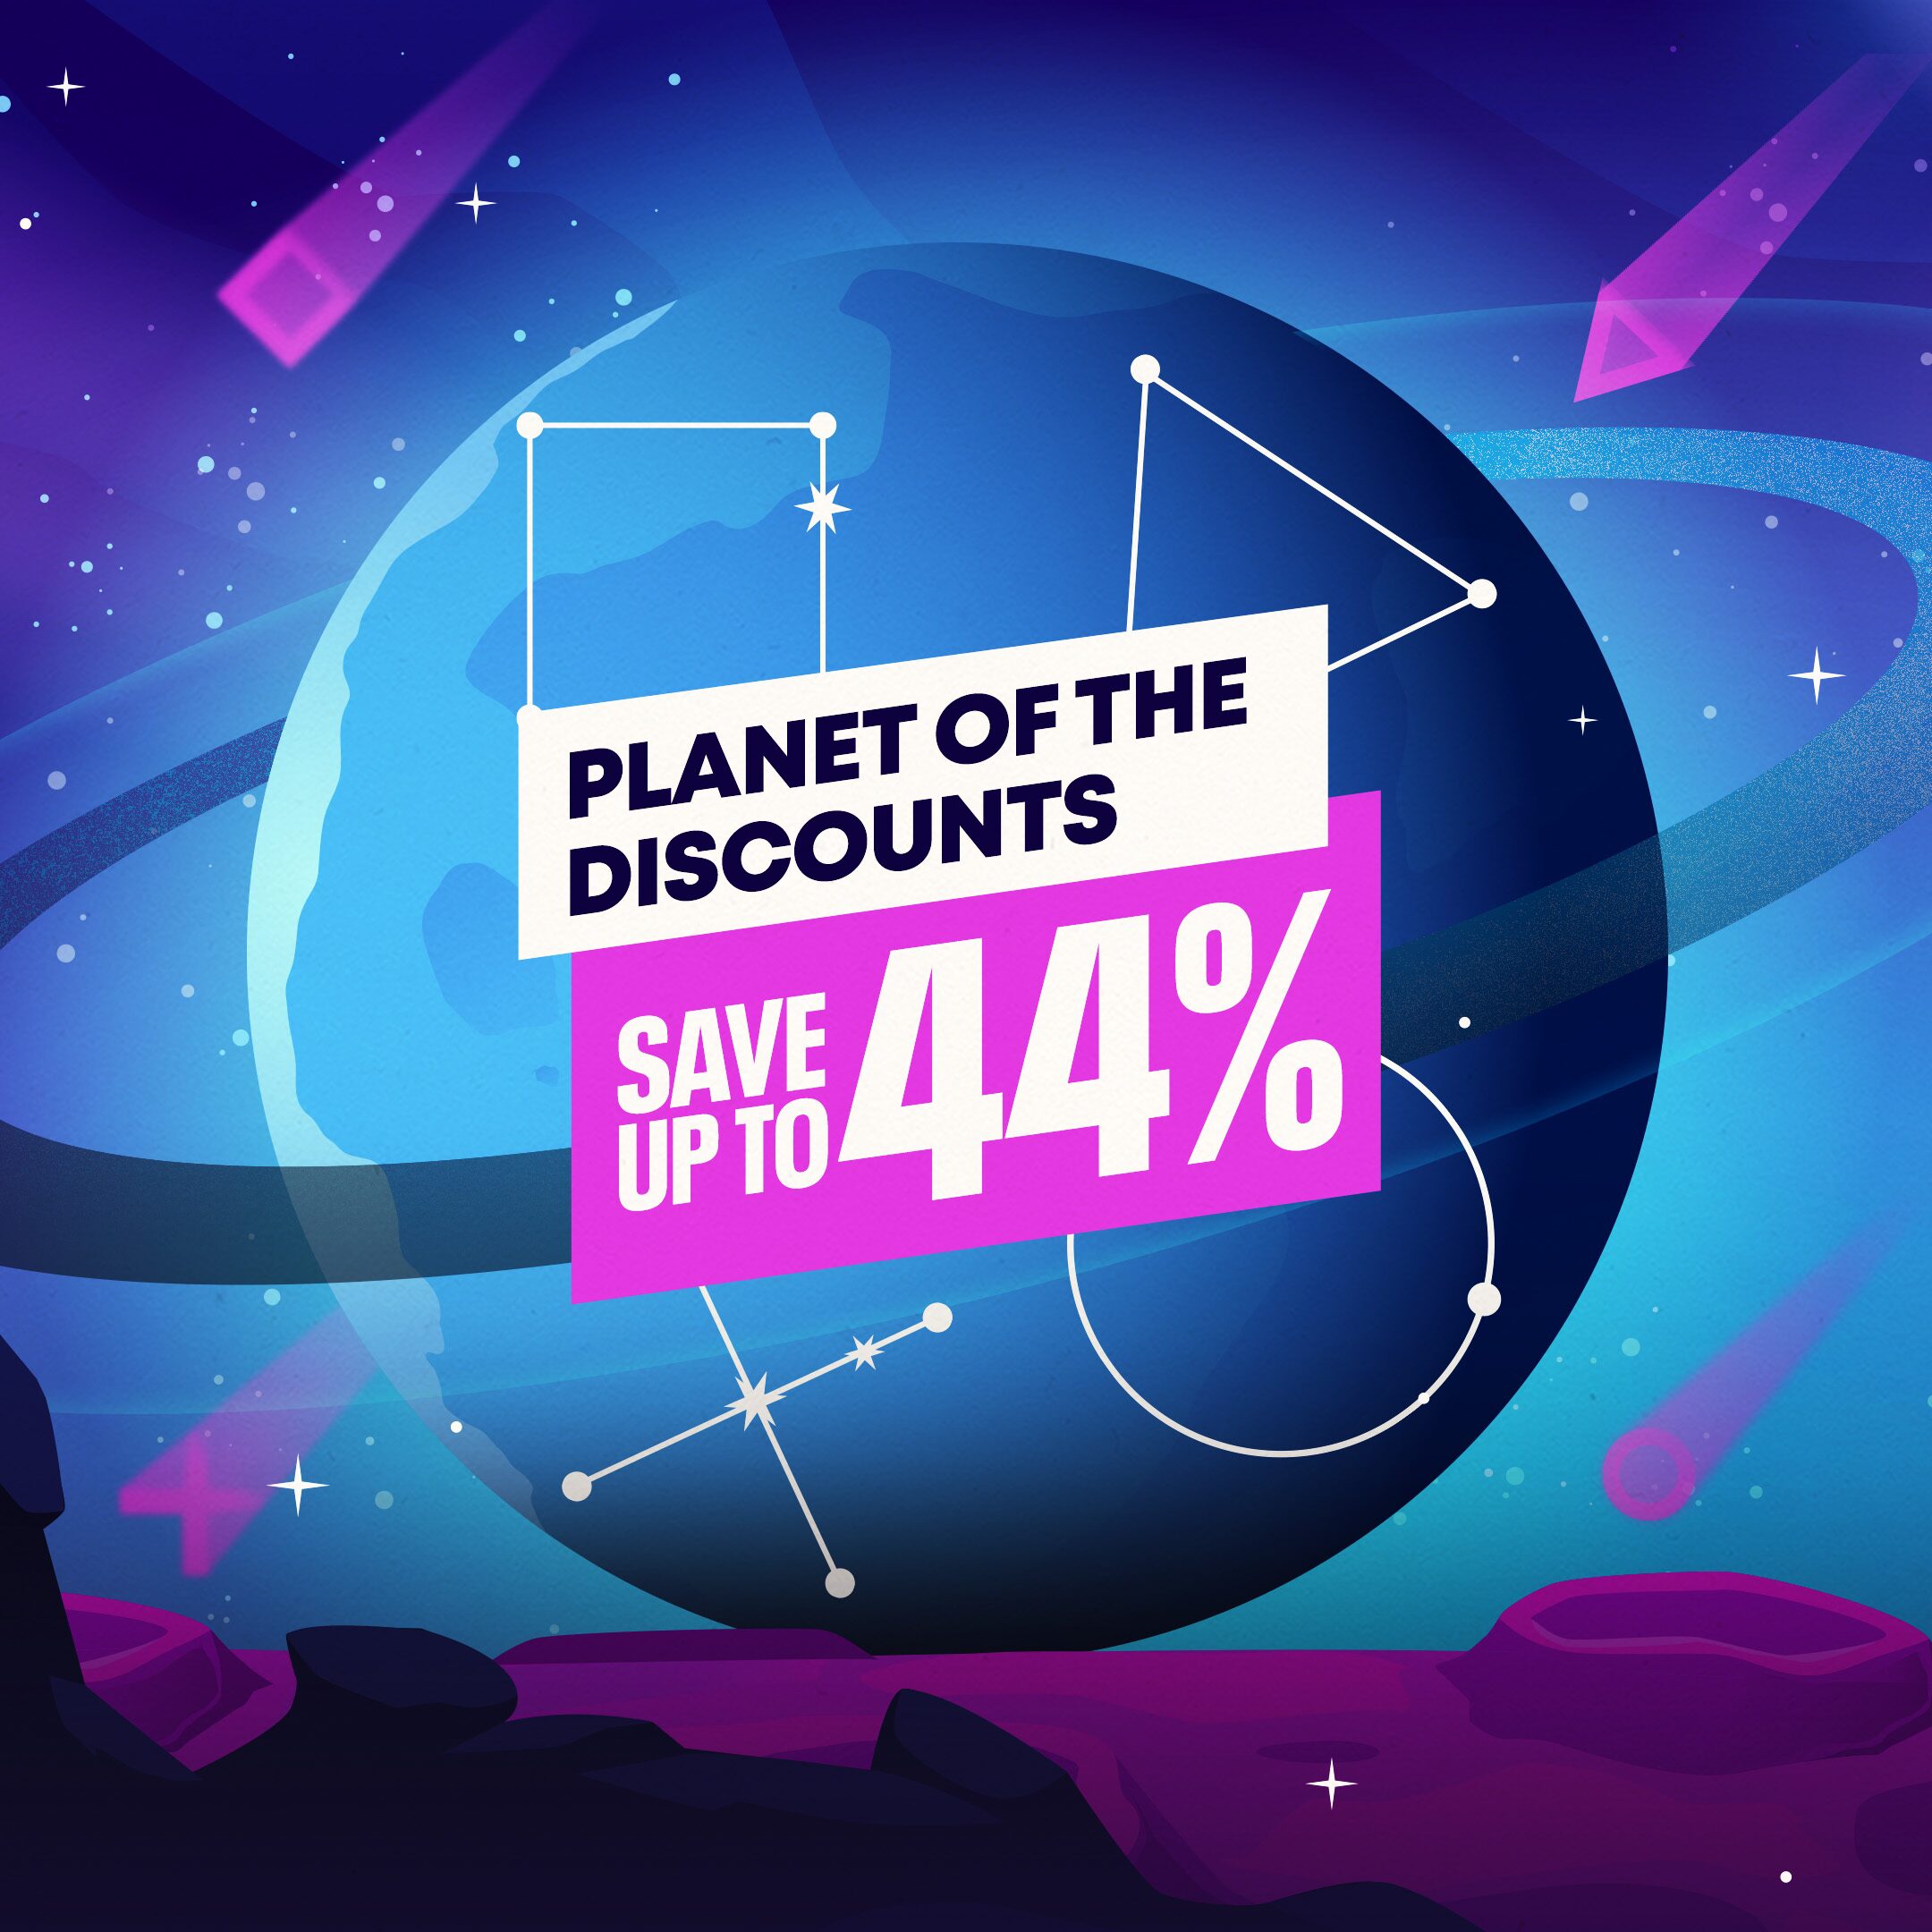 [PROMO] Planet of the Discounts - WH - A